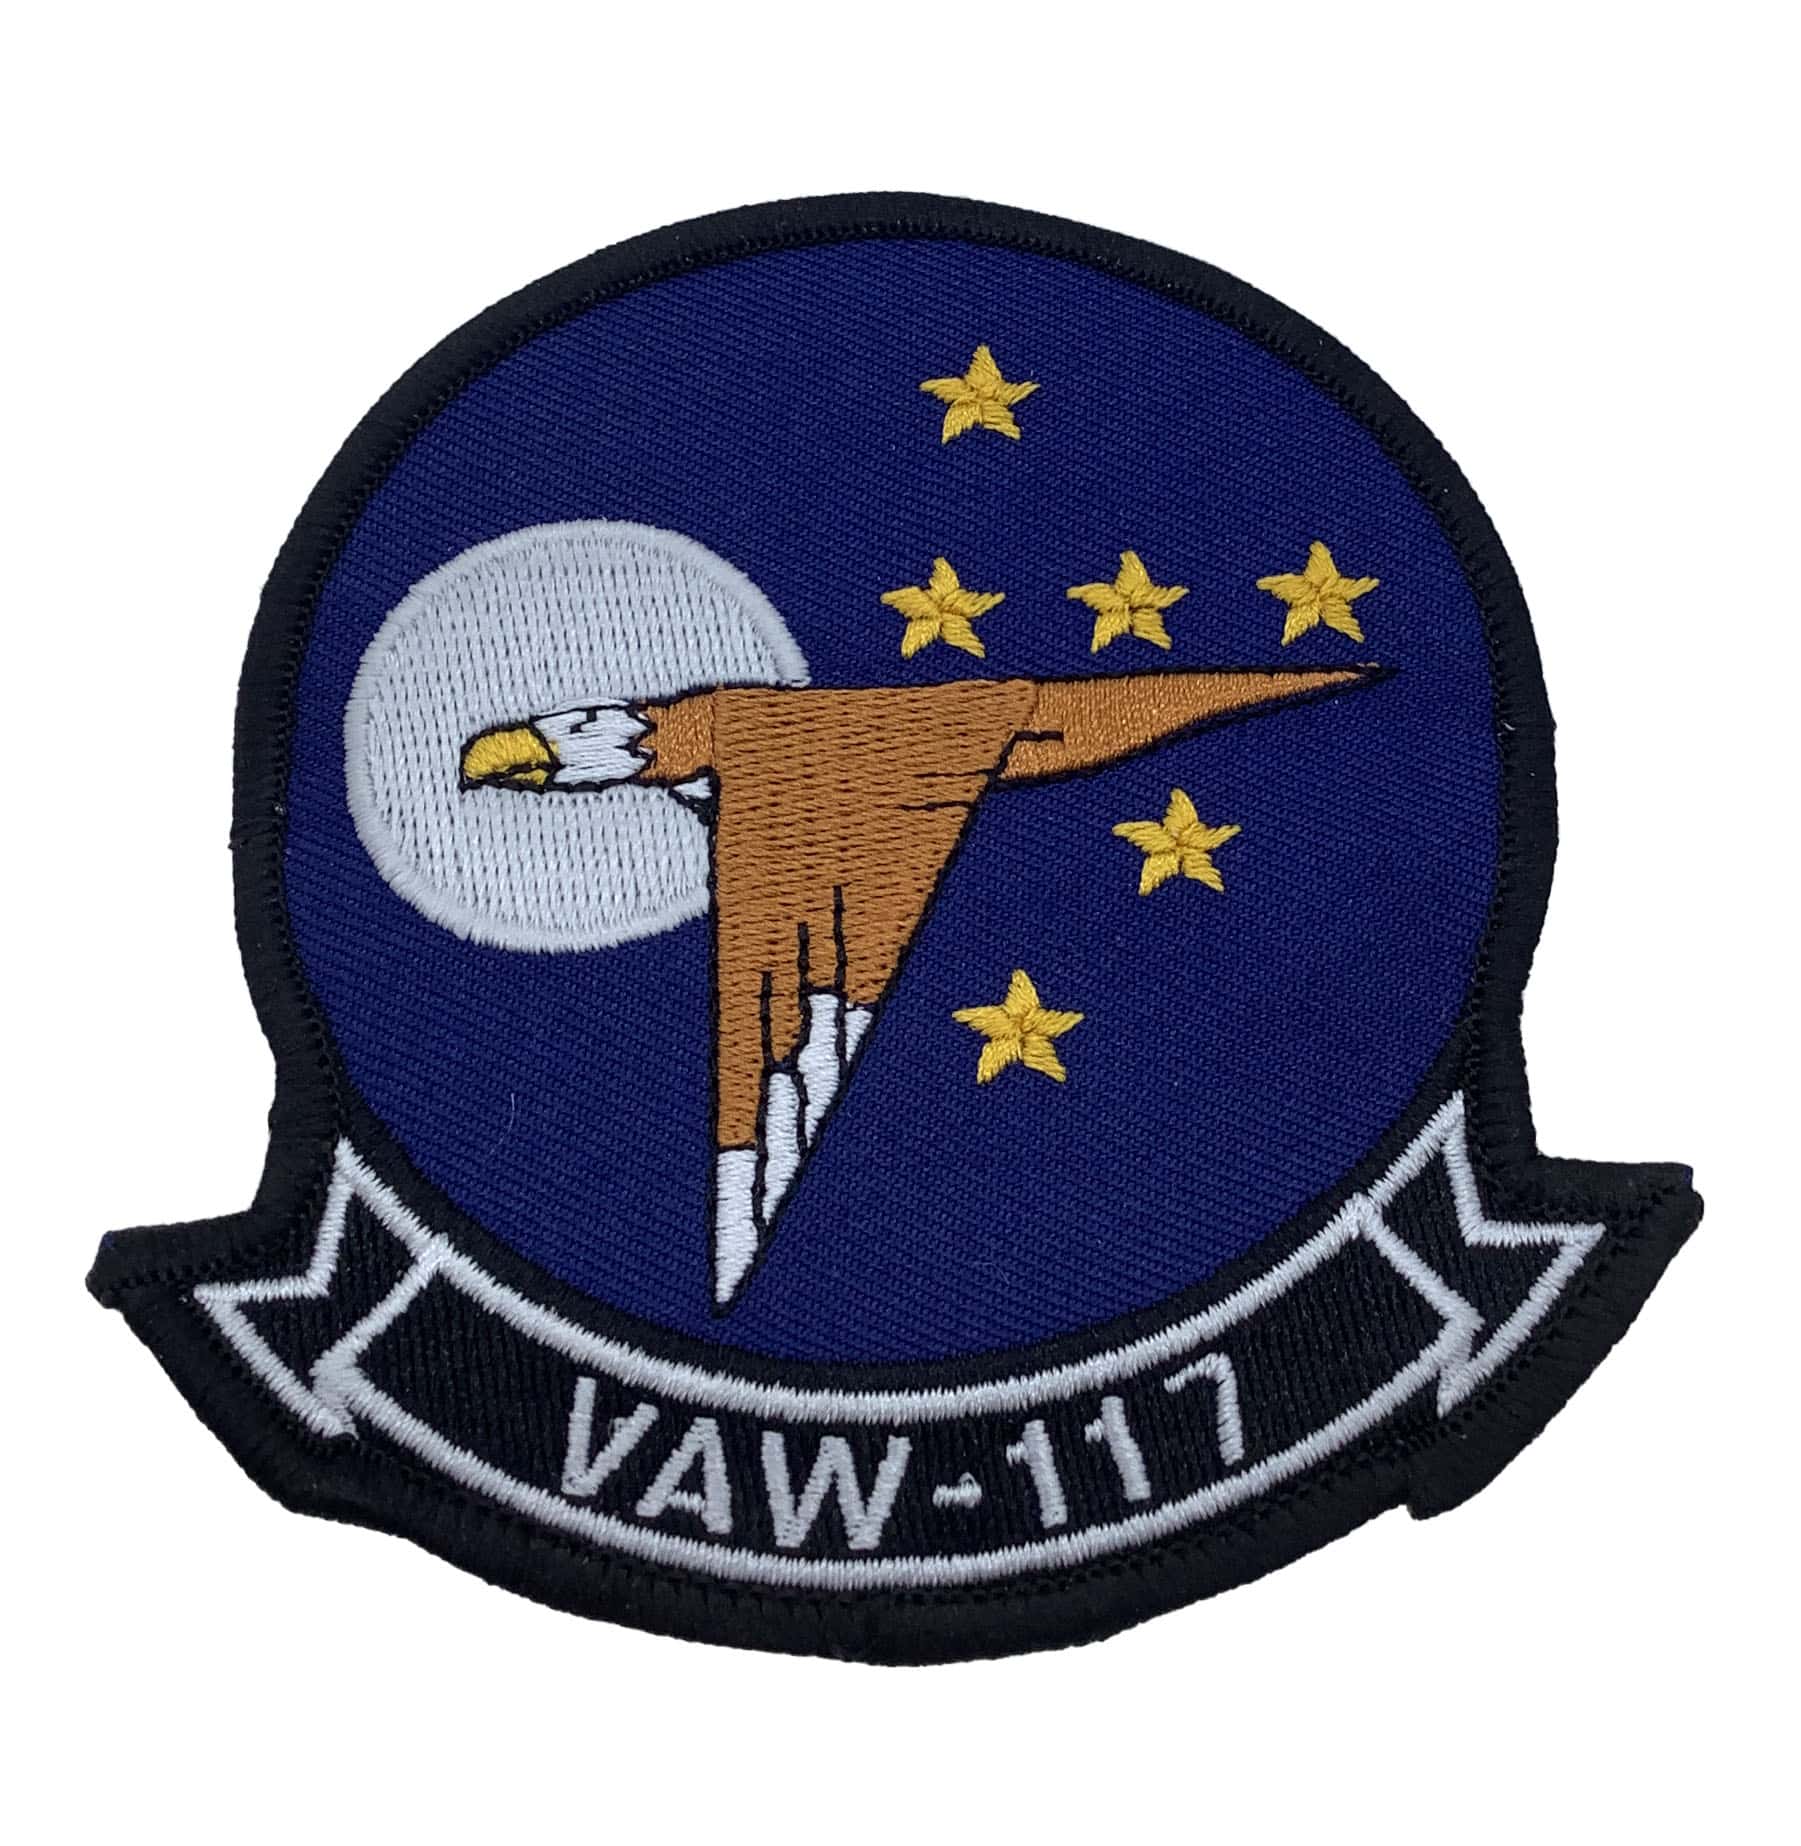 VAW-117 Wallbangers Patch – No Hook and Loop